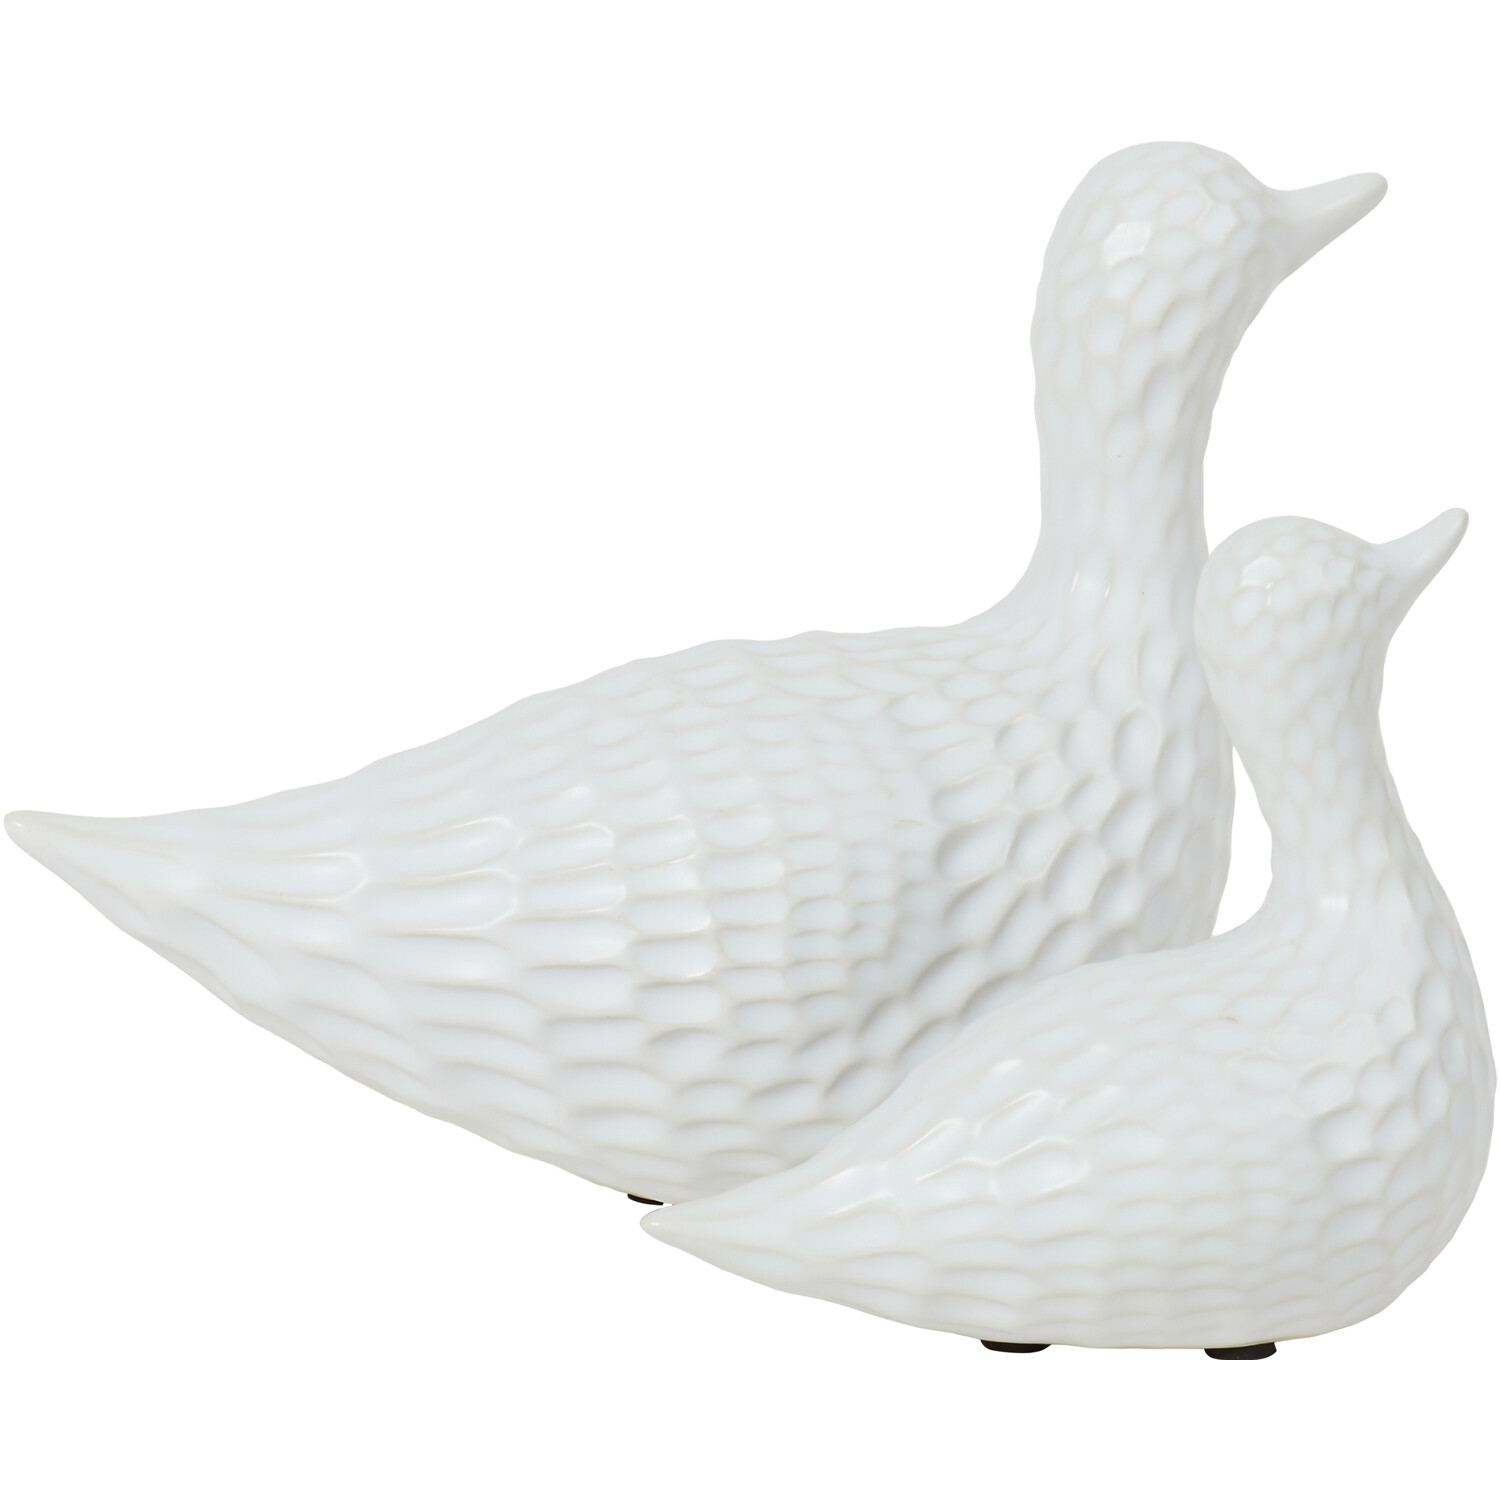 White Duck Ornament 2 Pack Image 2